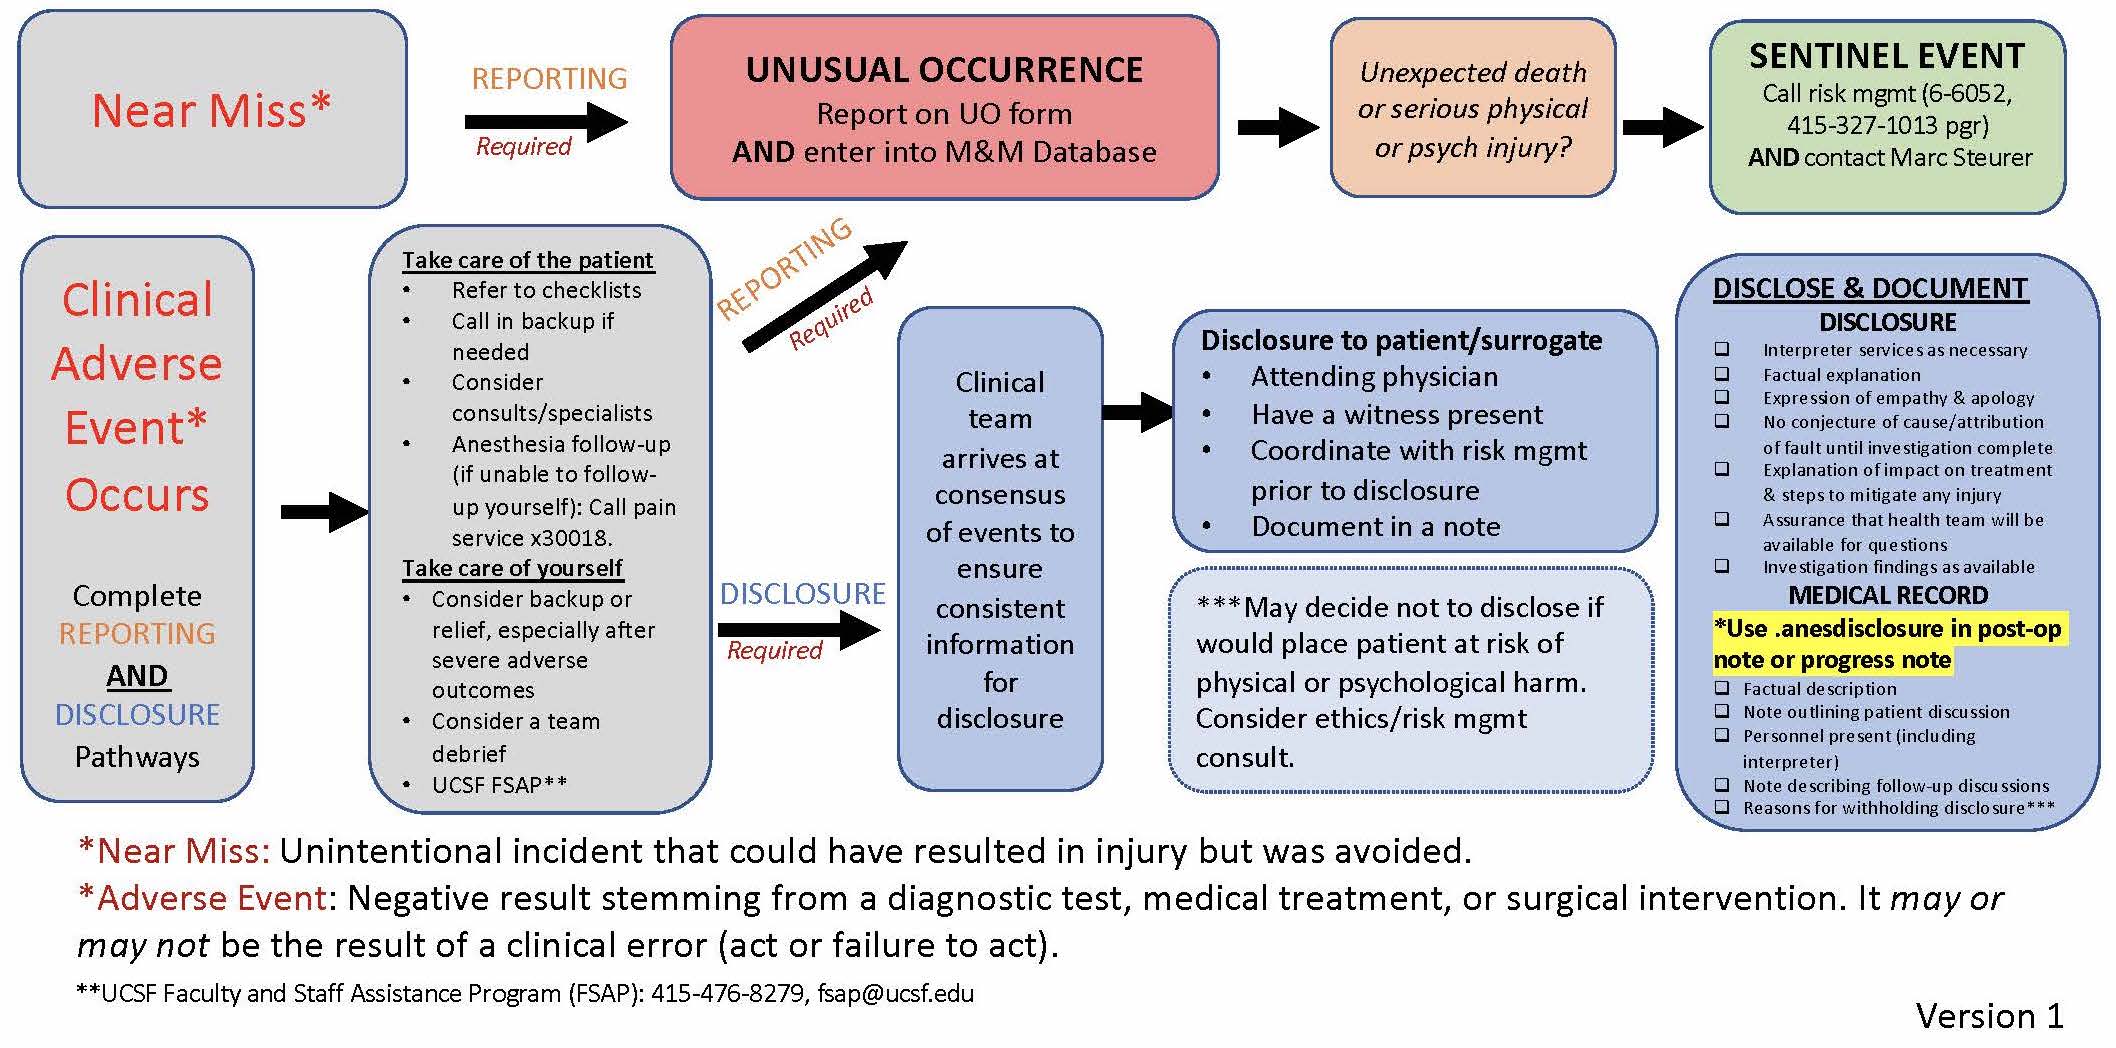 Adverse Event Disclosure Pathway